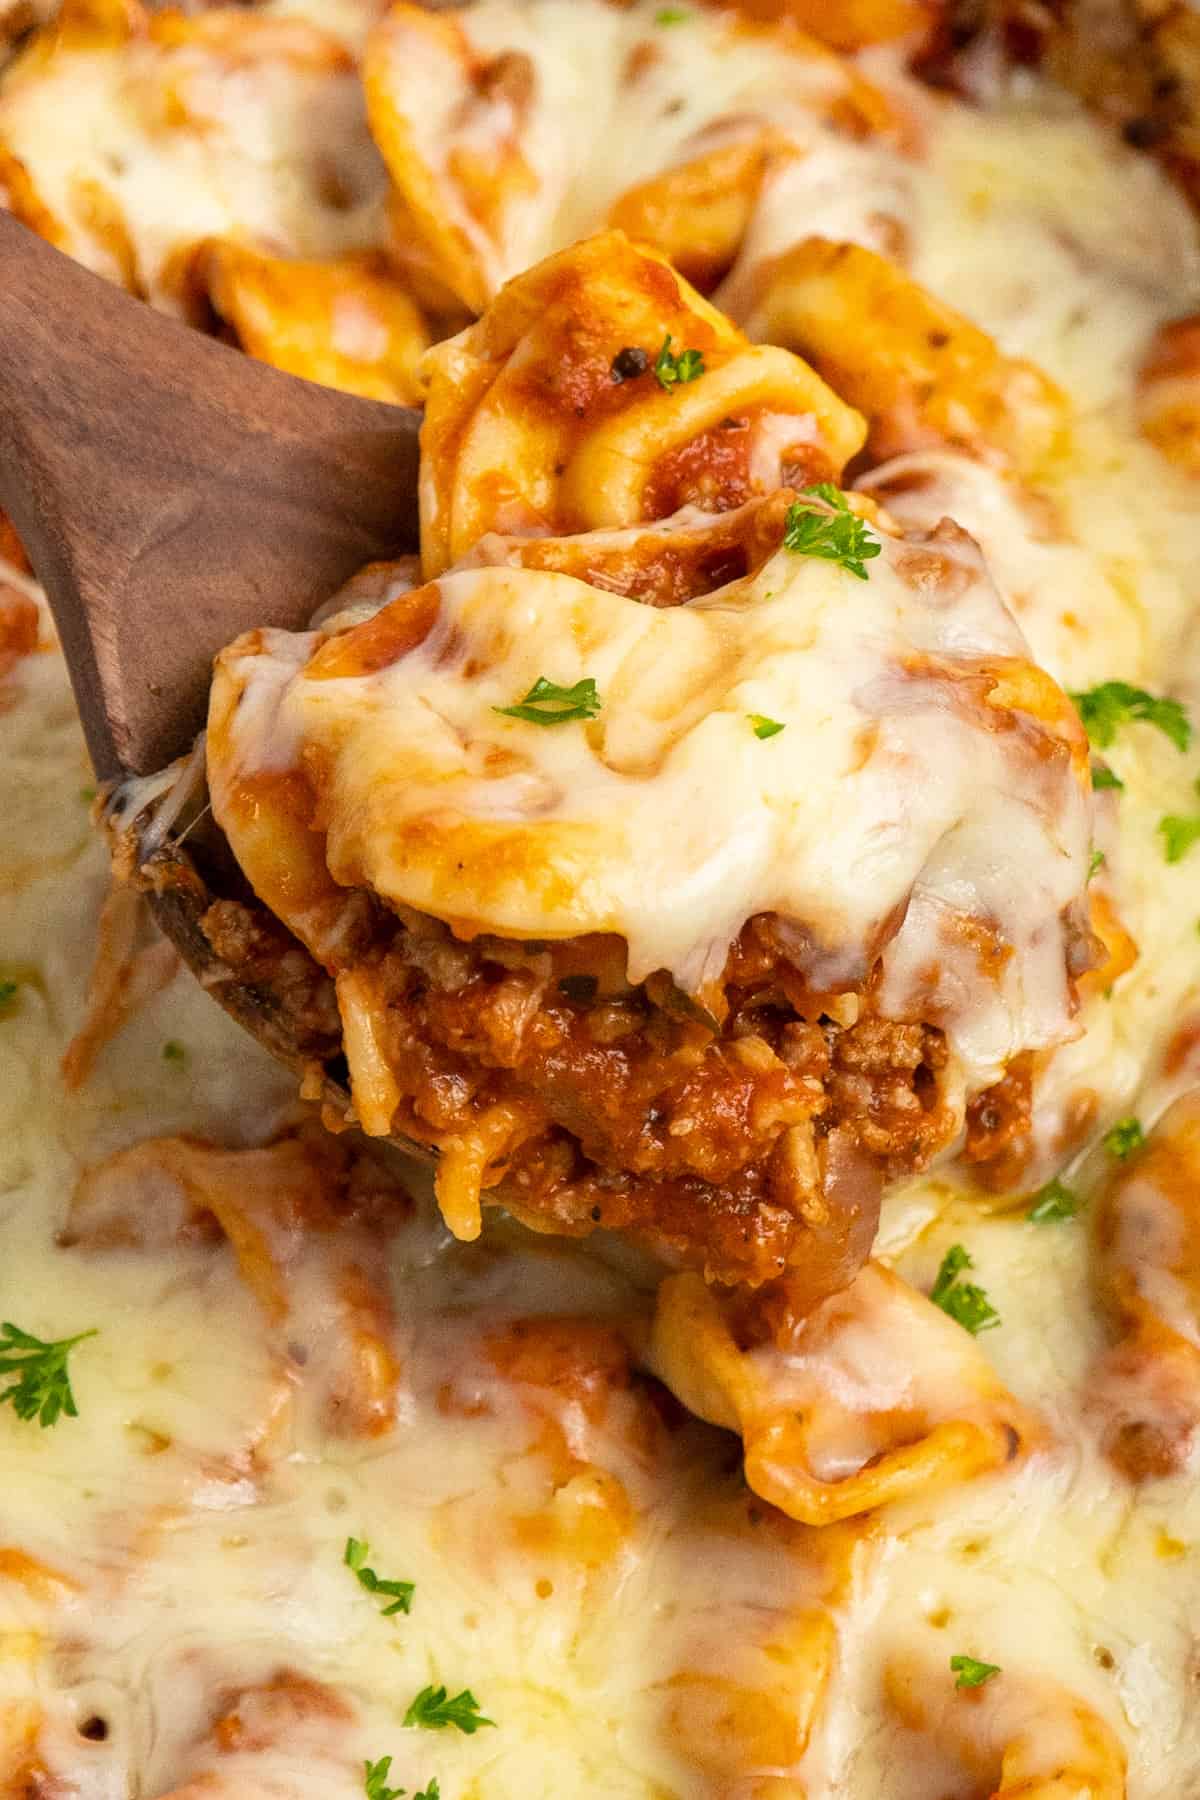 A wooden spoon holding cheesy tortellini in a meat sauce.